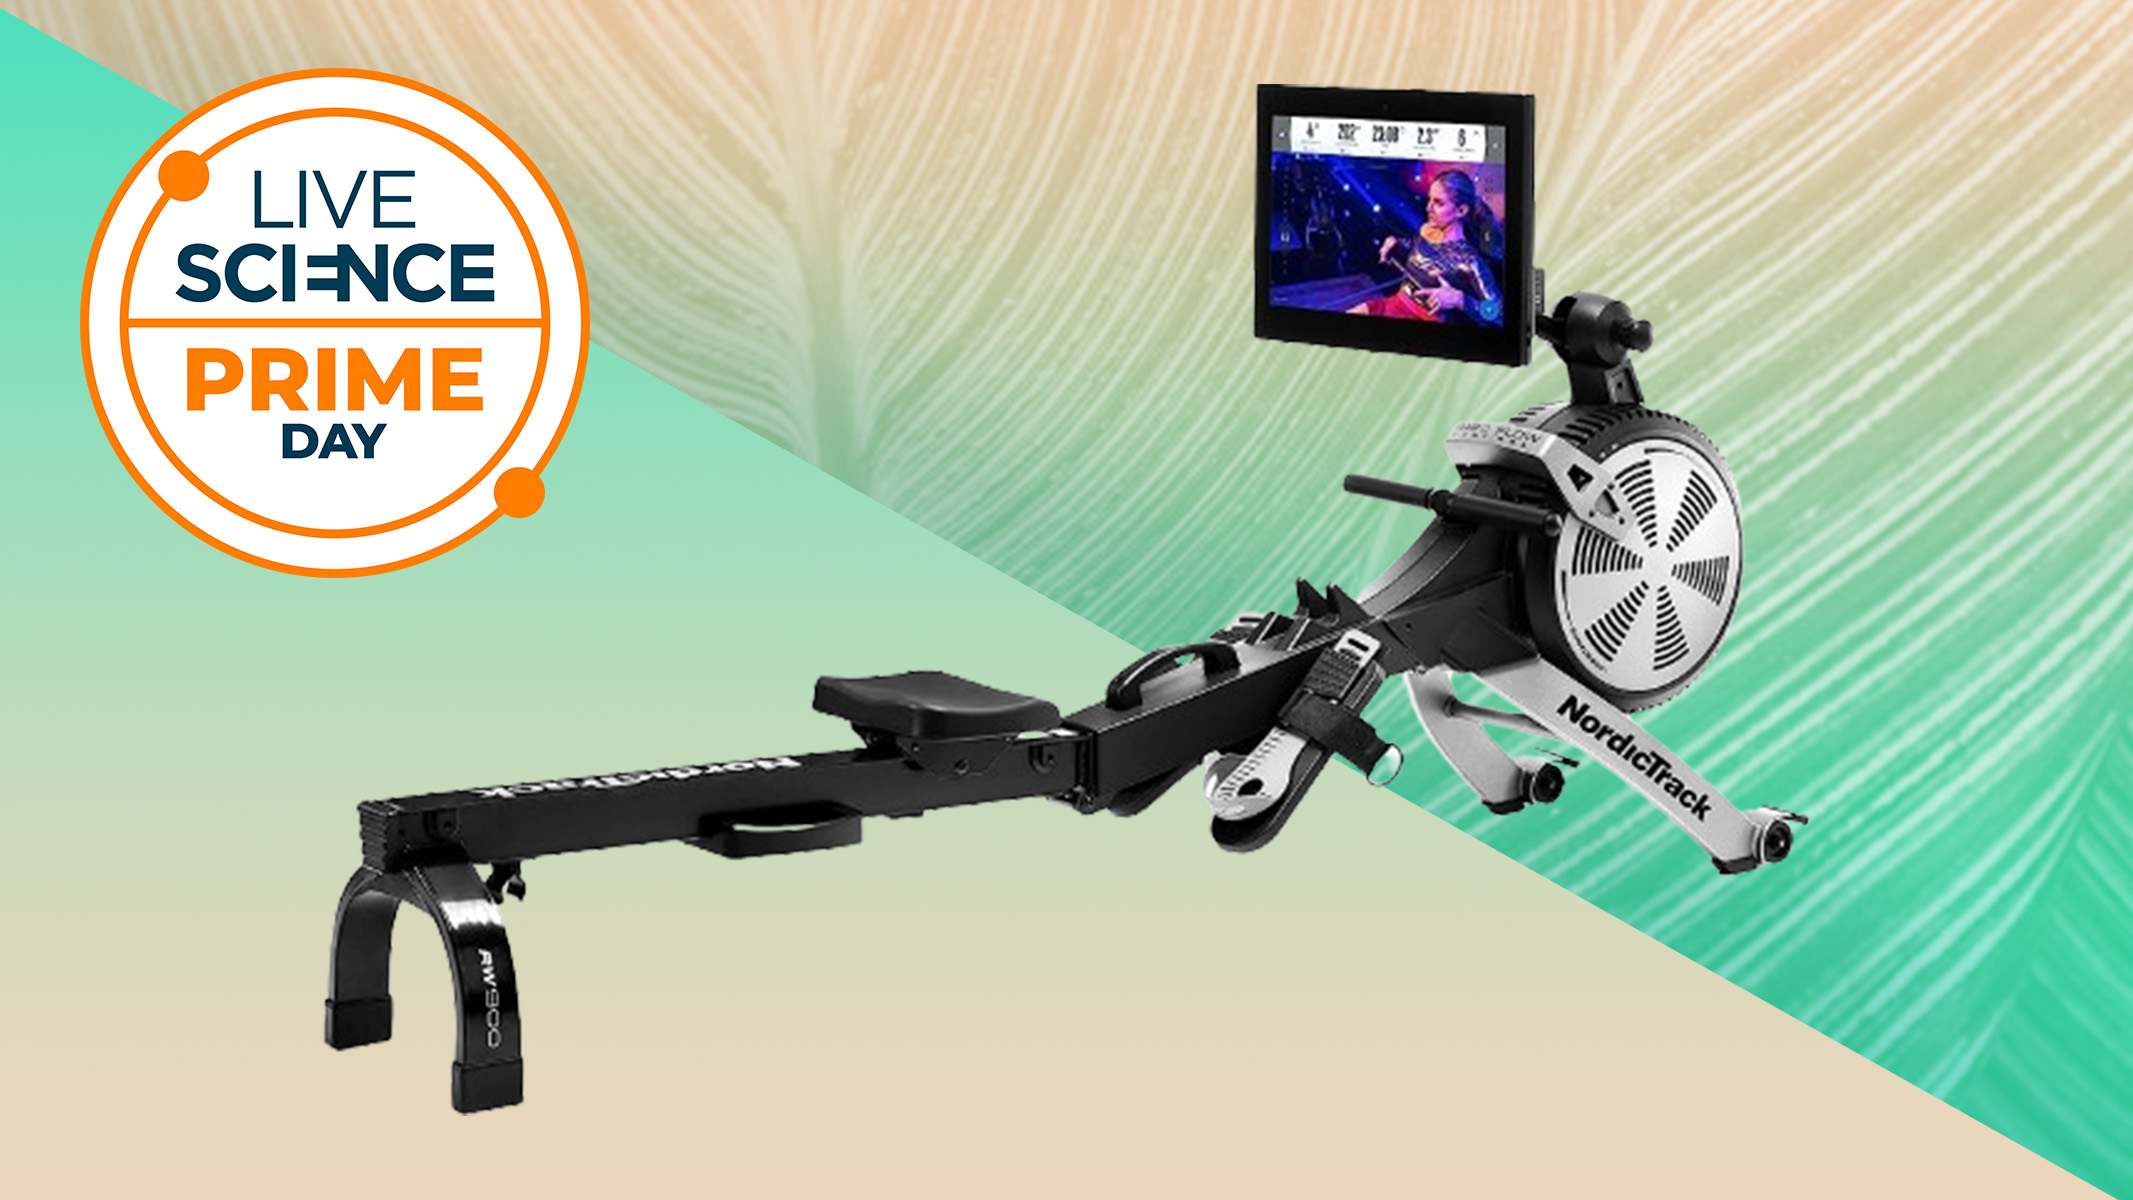  Save over $600 on this fantastic rowing machine from NordicTrack 